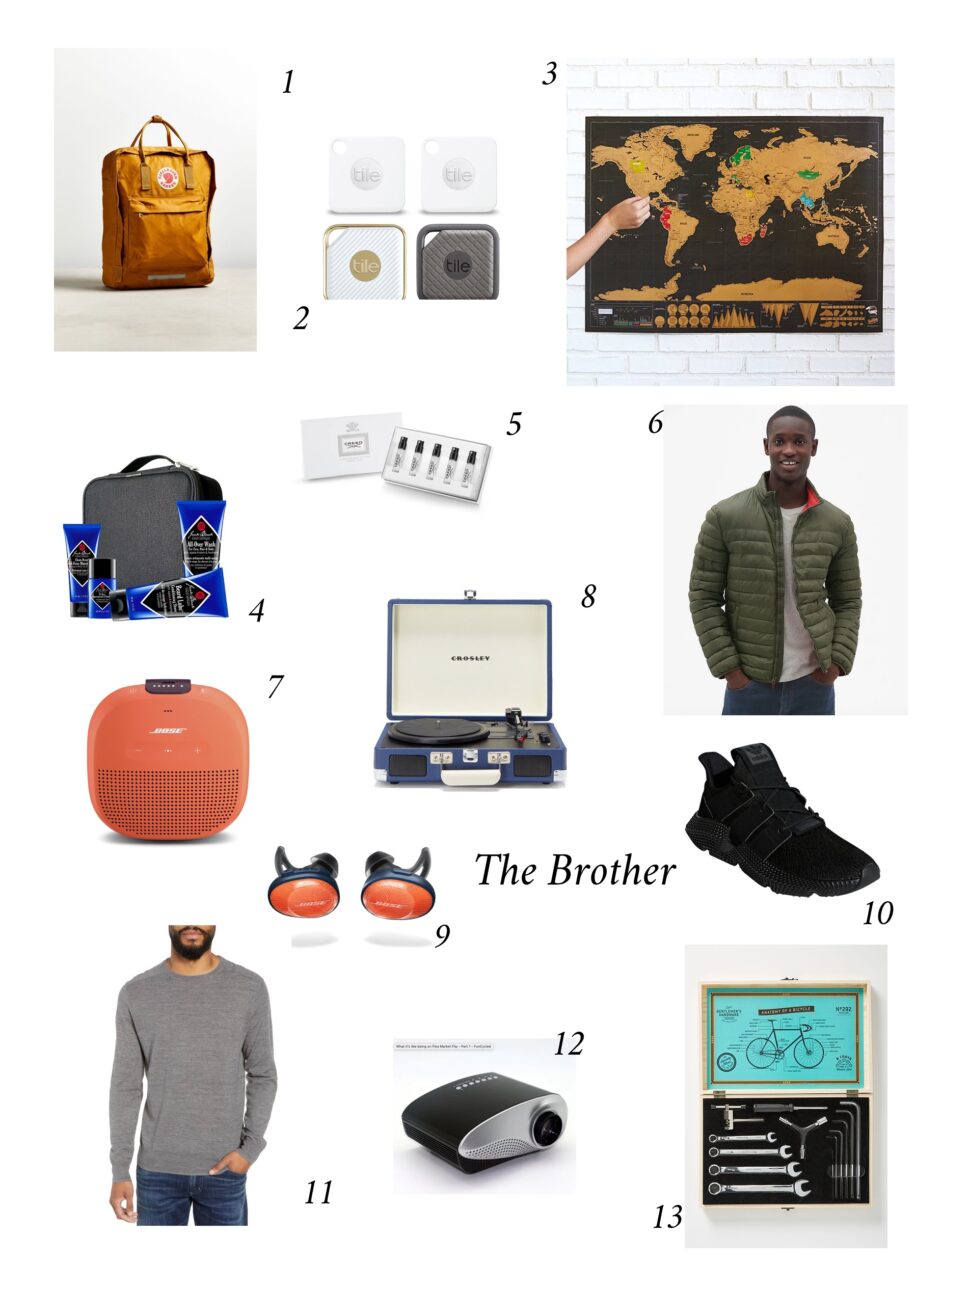 Unique Gift Ideas for the Man that Has Everything